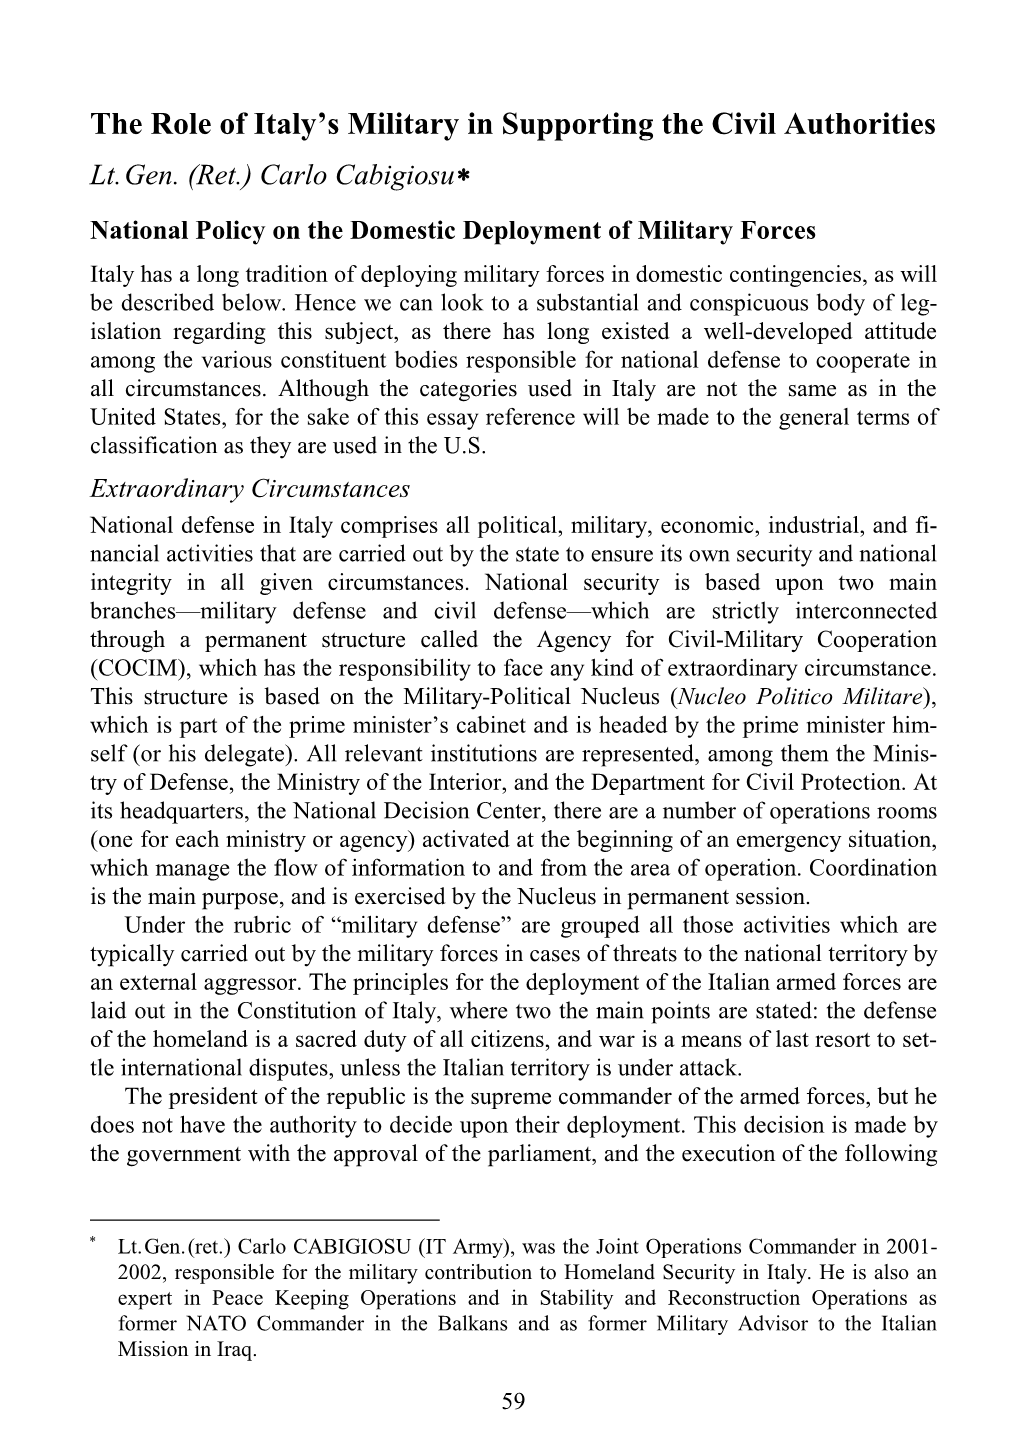 The Role of Italy's Military in Supporting the Civil Authorities